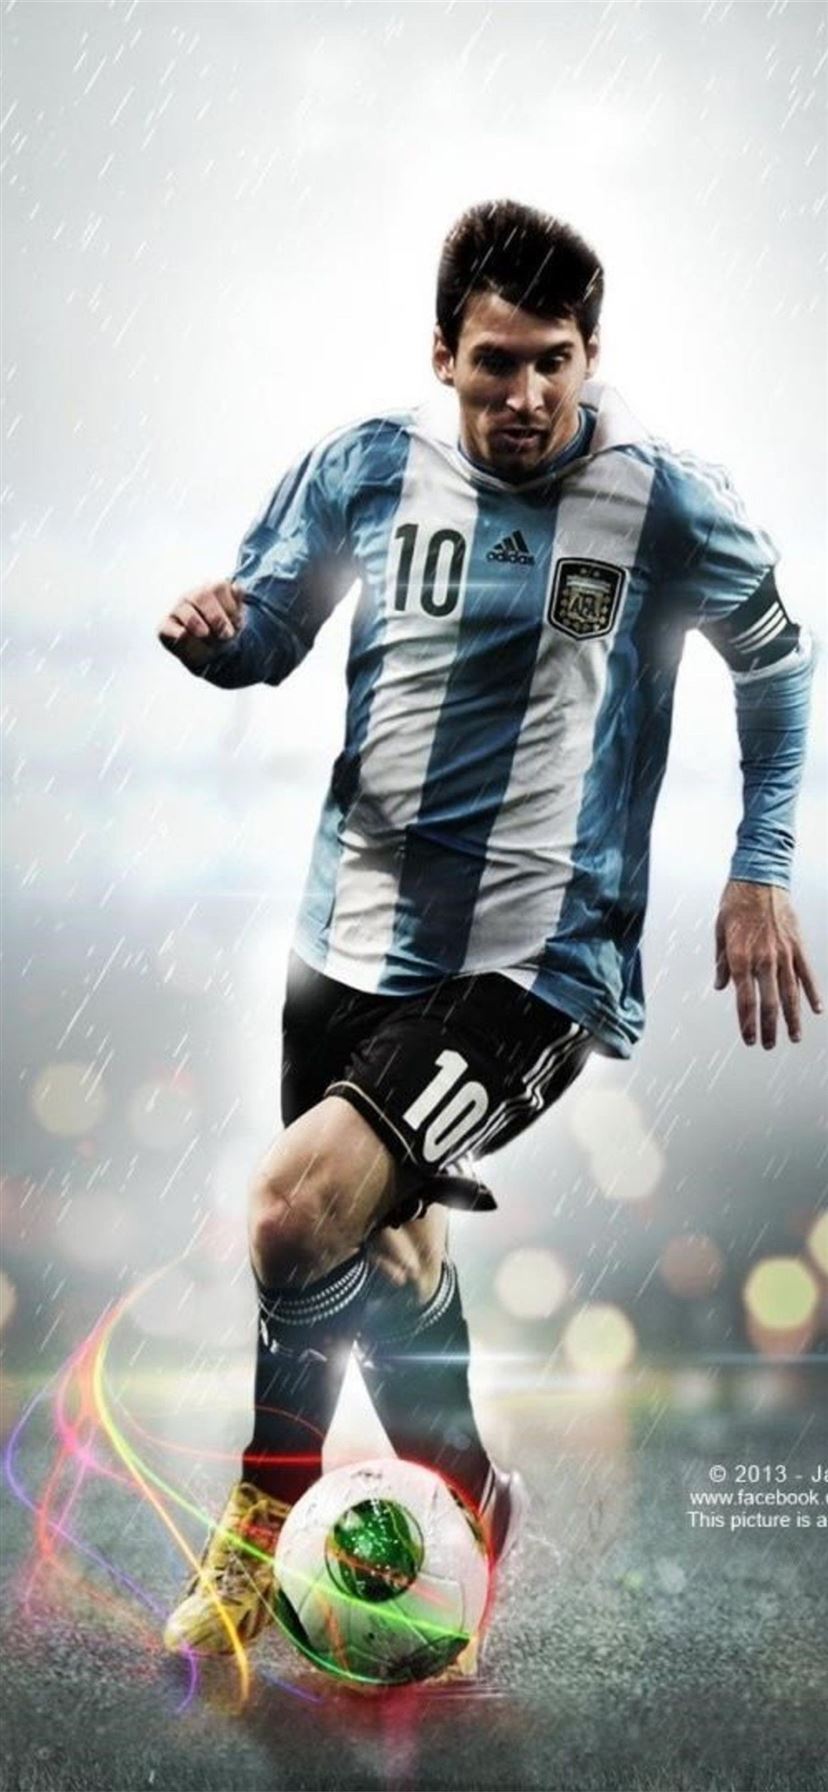 ARGENTINA wallpaper by Mistica168  Download on ZEDGE  b6b2